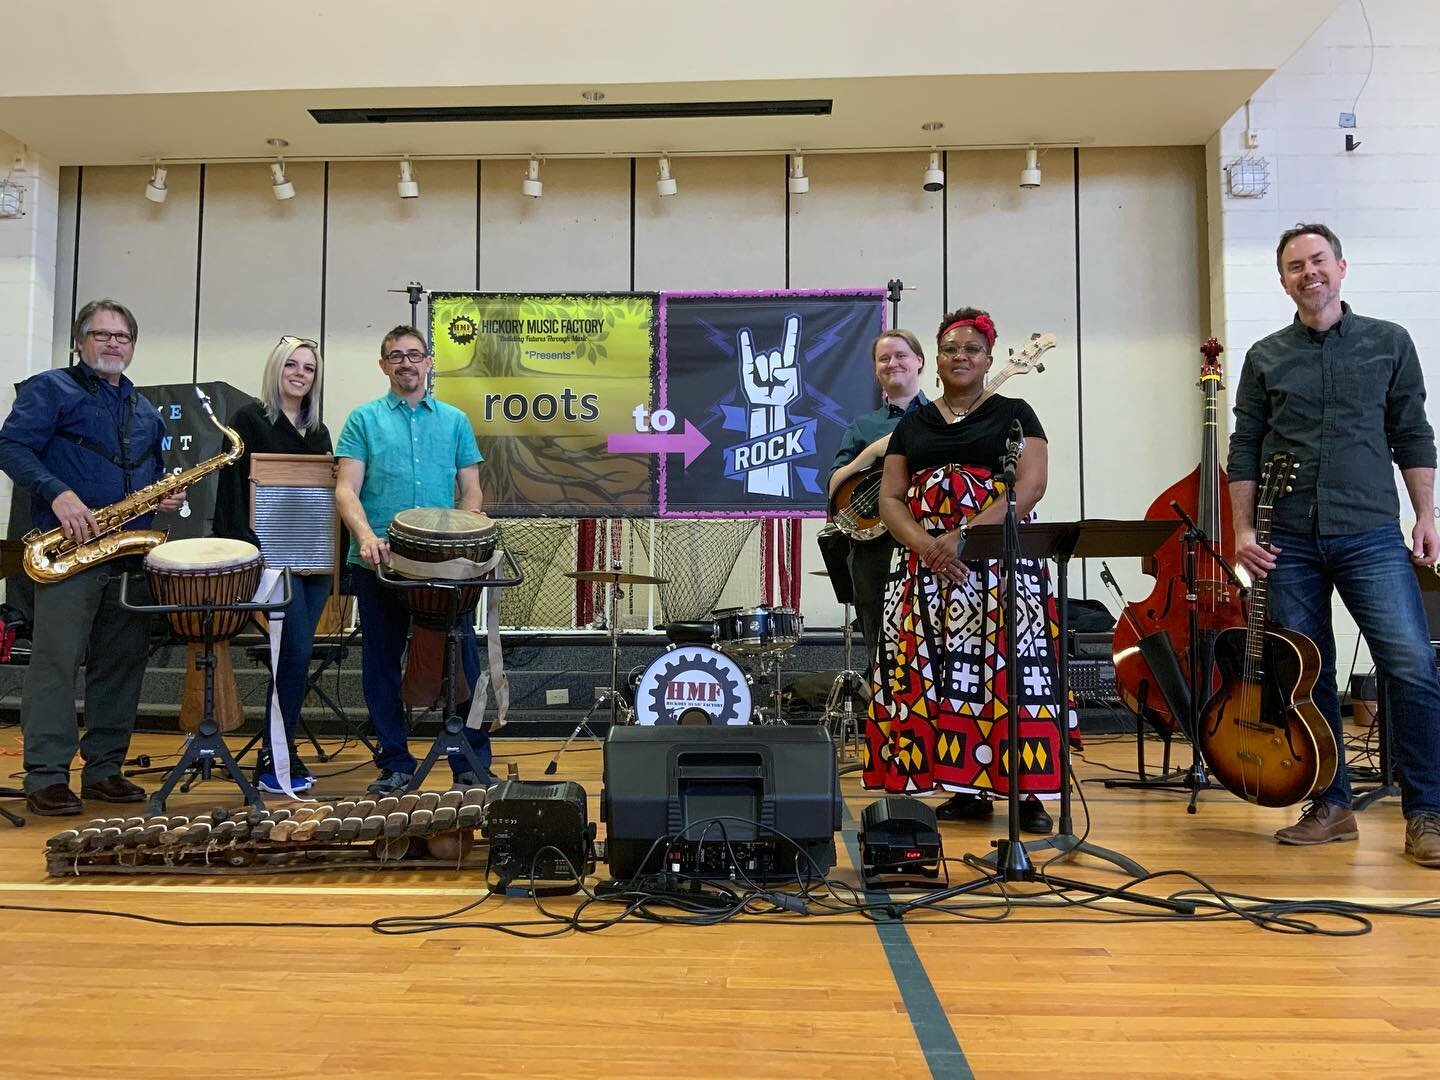 We had a blast performing our &ldquo;Roots to Rock&rdquo; program at
Jenkins and Viewmont Elementary schools today. Can&rsquo;t wait to do it again. #blackhistorymonth #bluesmusic #jazz #gosple #rocknroll #africanmusic